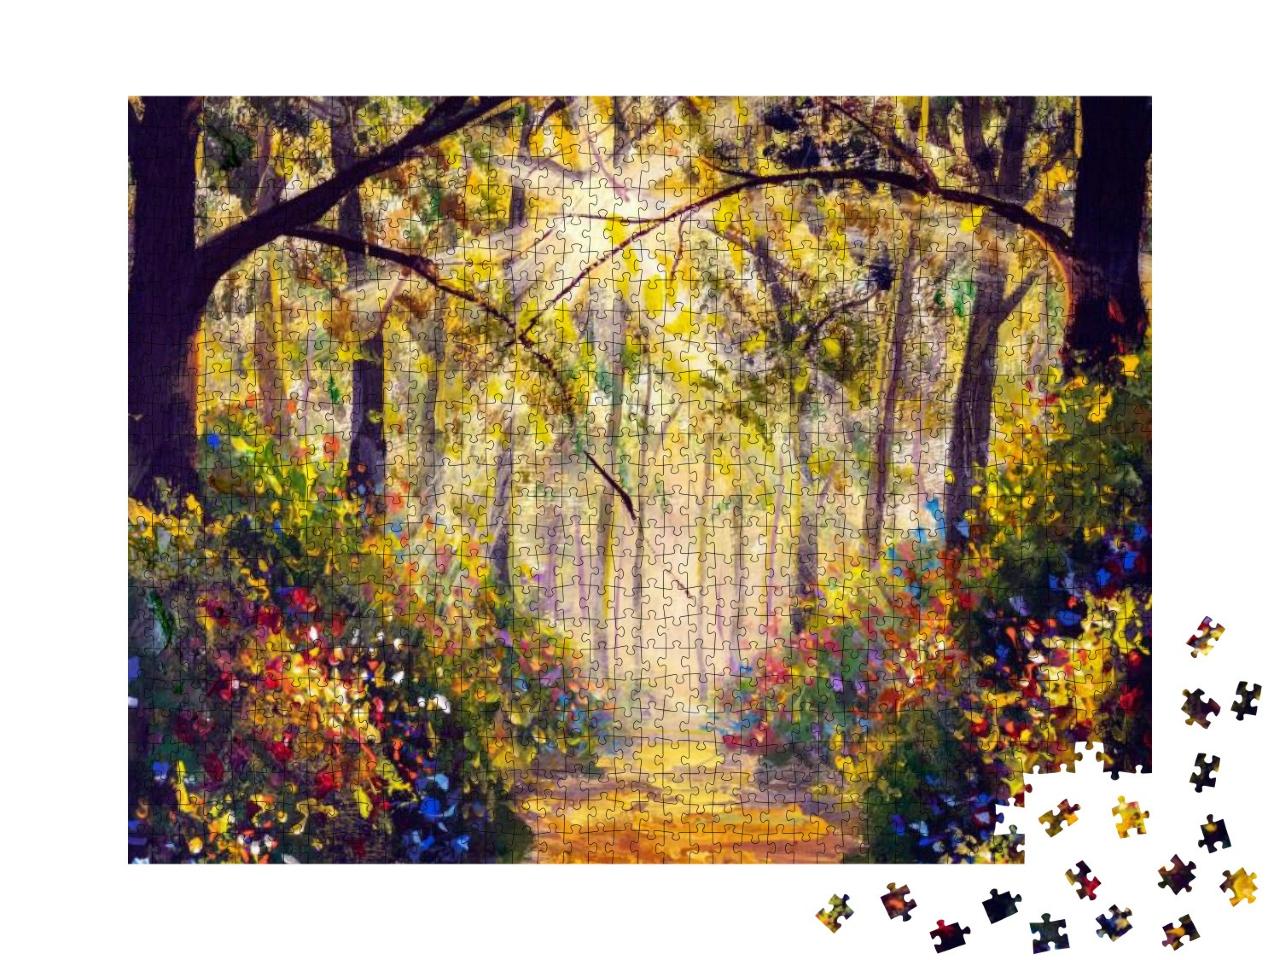 Sunny Forest Wood Trees Original Oil Painting. Road in Su... Jigsaw Puzzle with 1000 pieces